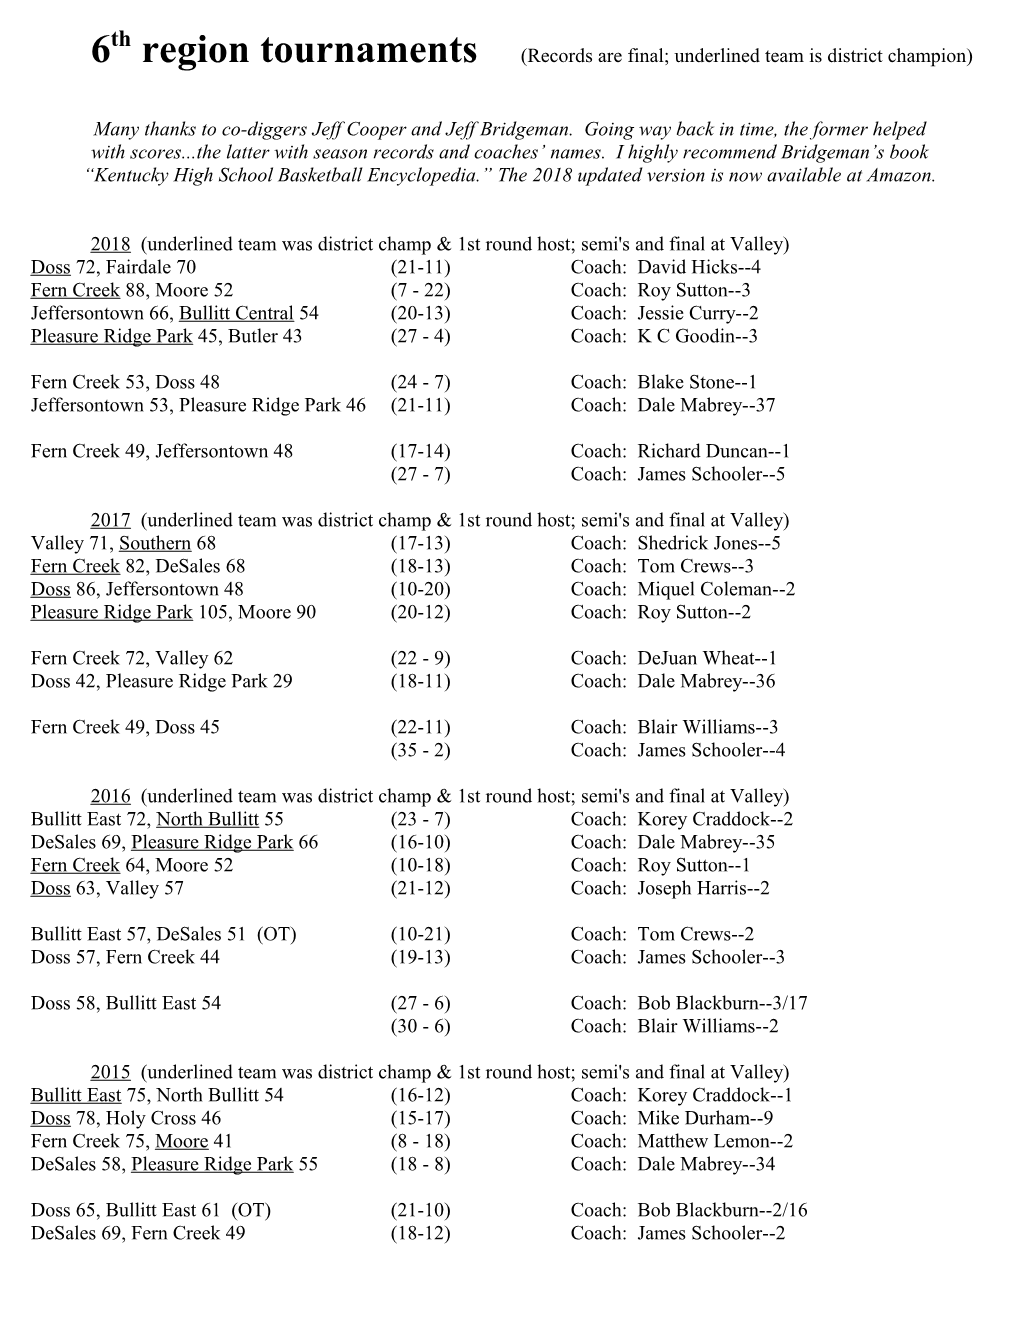 6Th Region Tournaments (Records Are Final; Underlined Team Is District Champion)